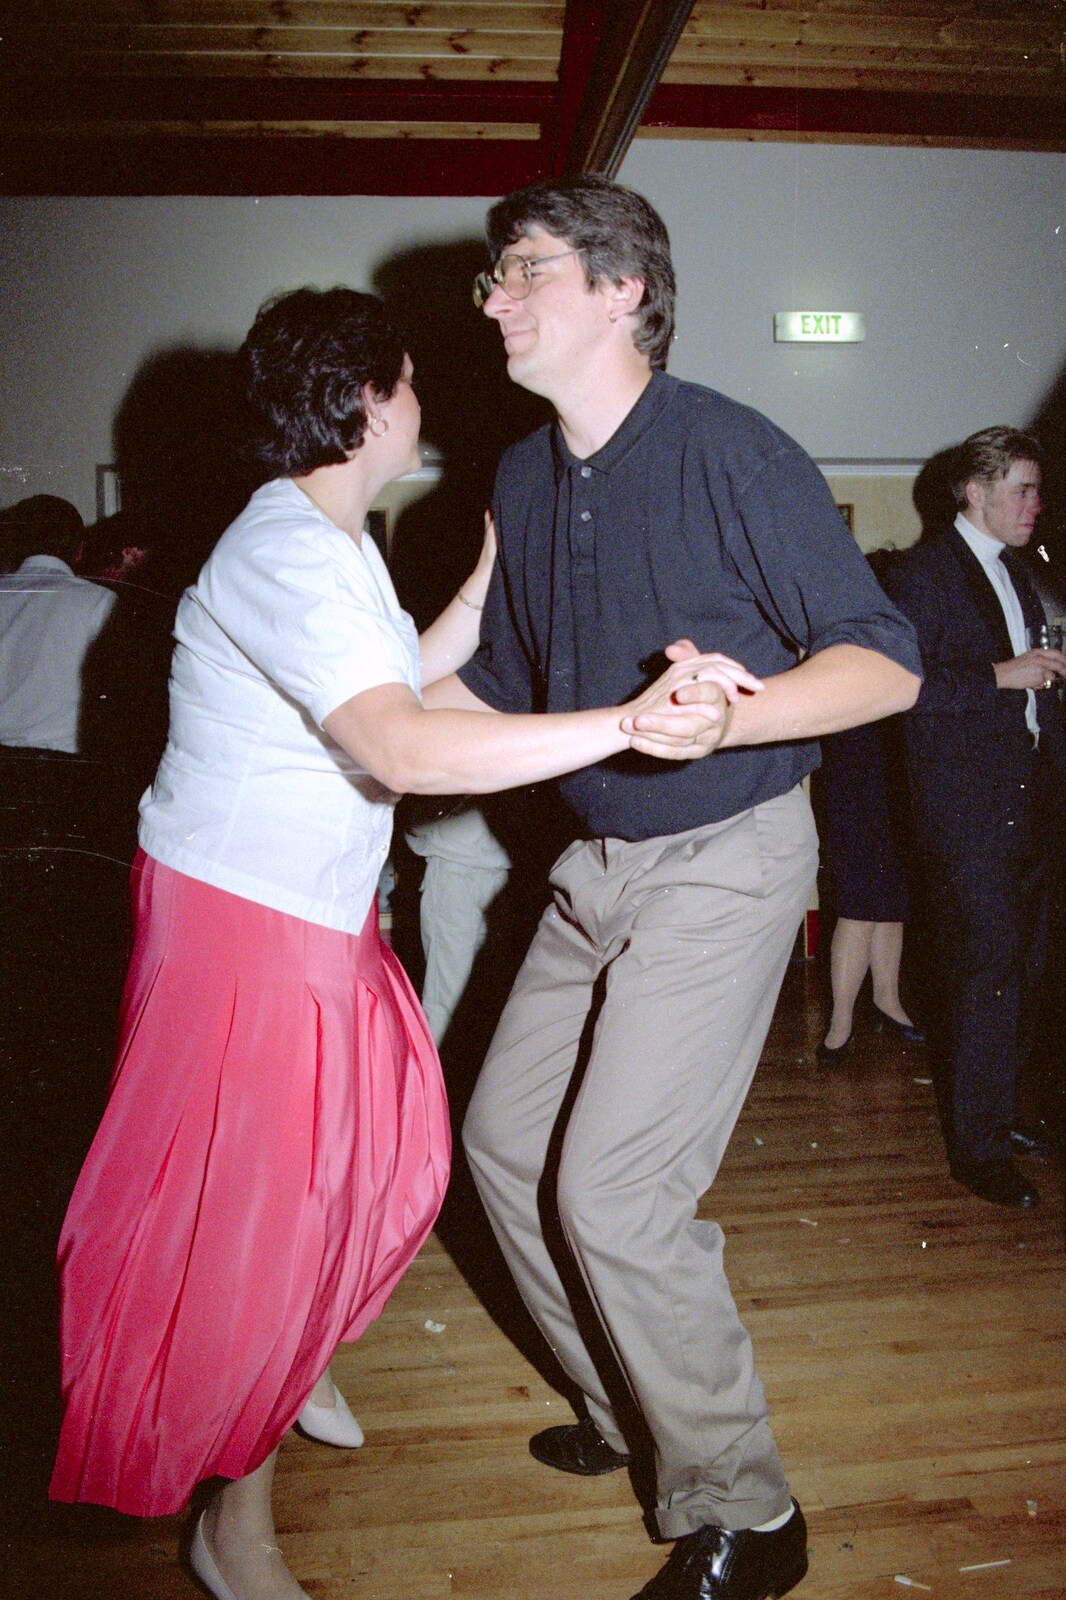 George from stores does some dancing from Printec Kelly's Wedding, Eye, Suffolk - 25th April 1992